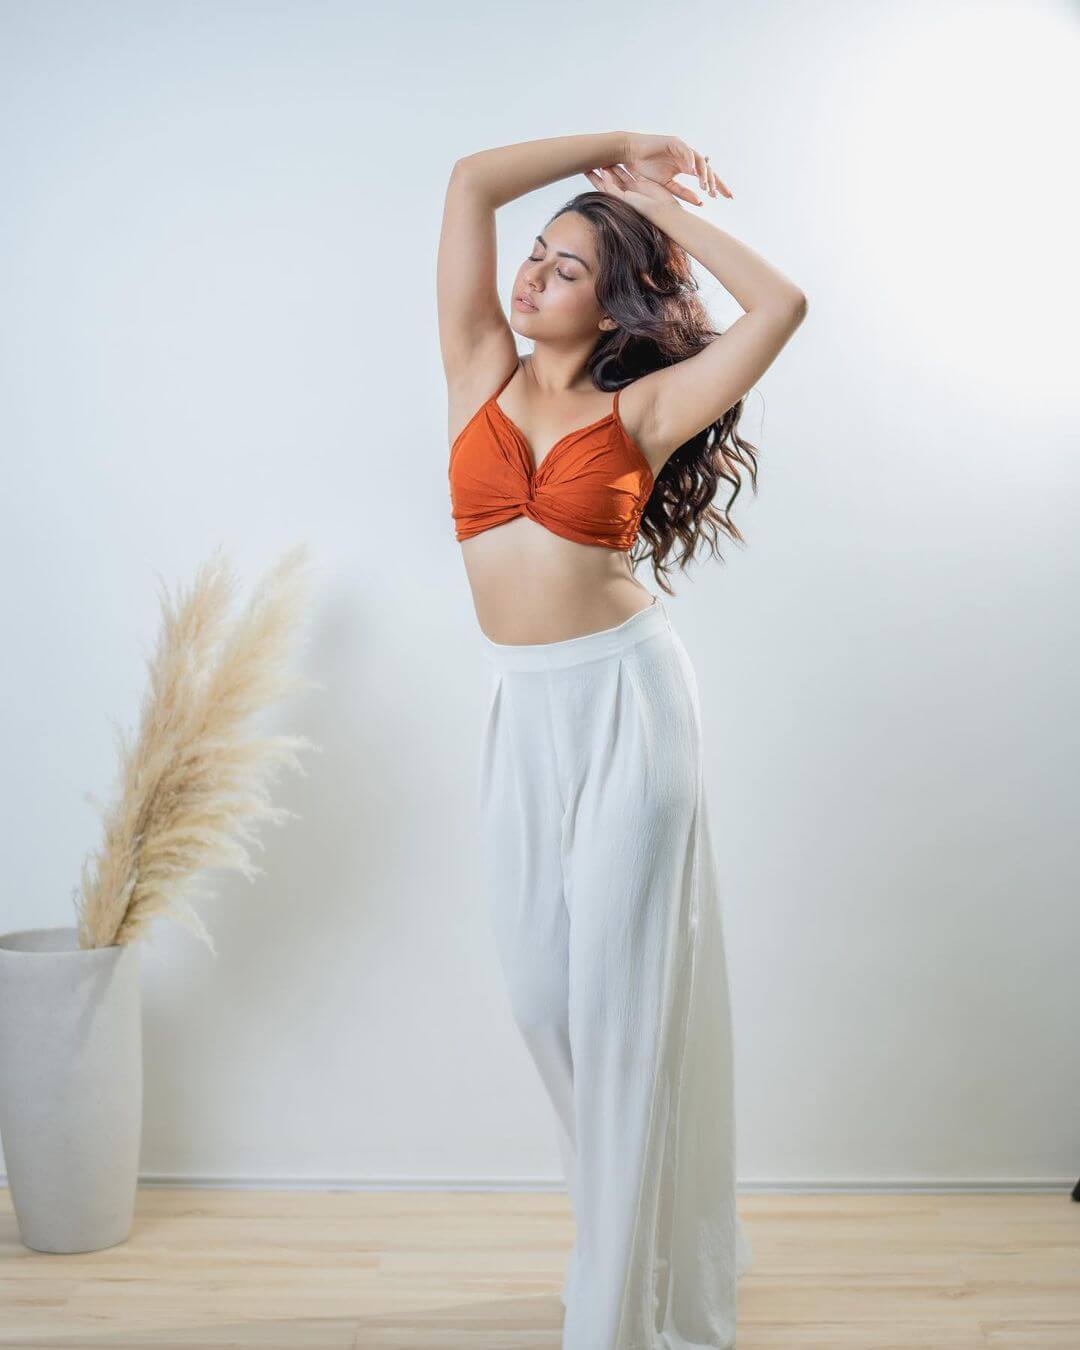 Reem Shaikh Strike A Sexy Pose In Orange Corset With White Flared Pants